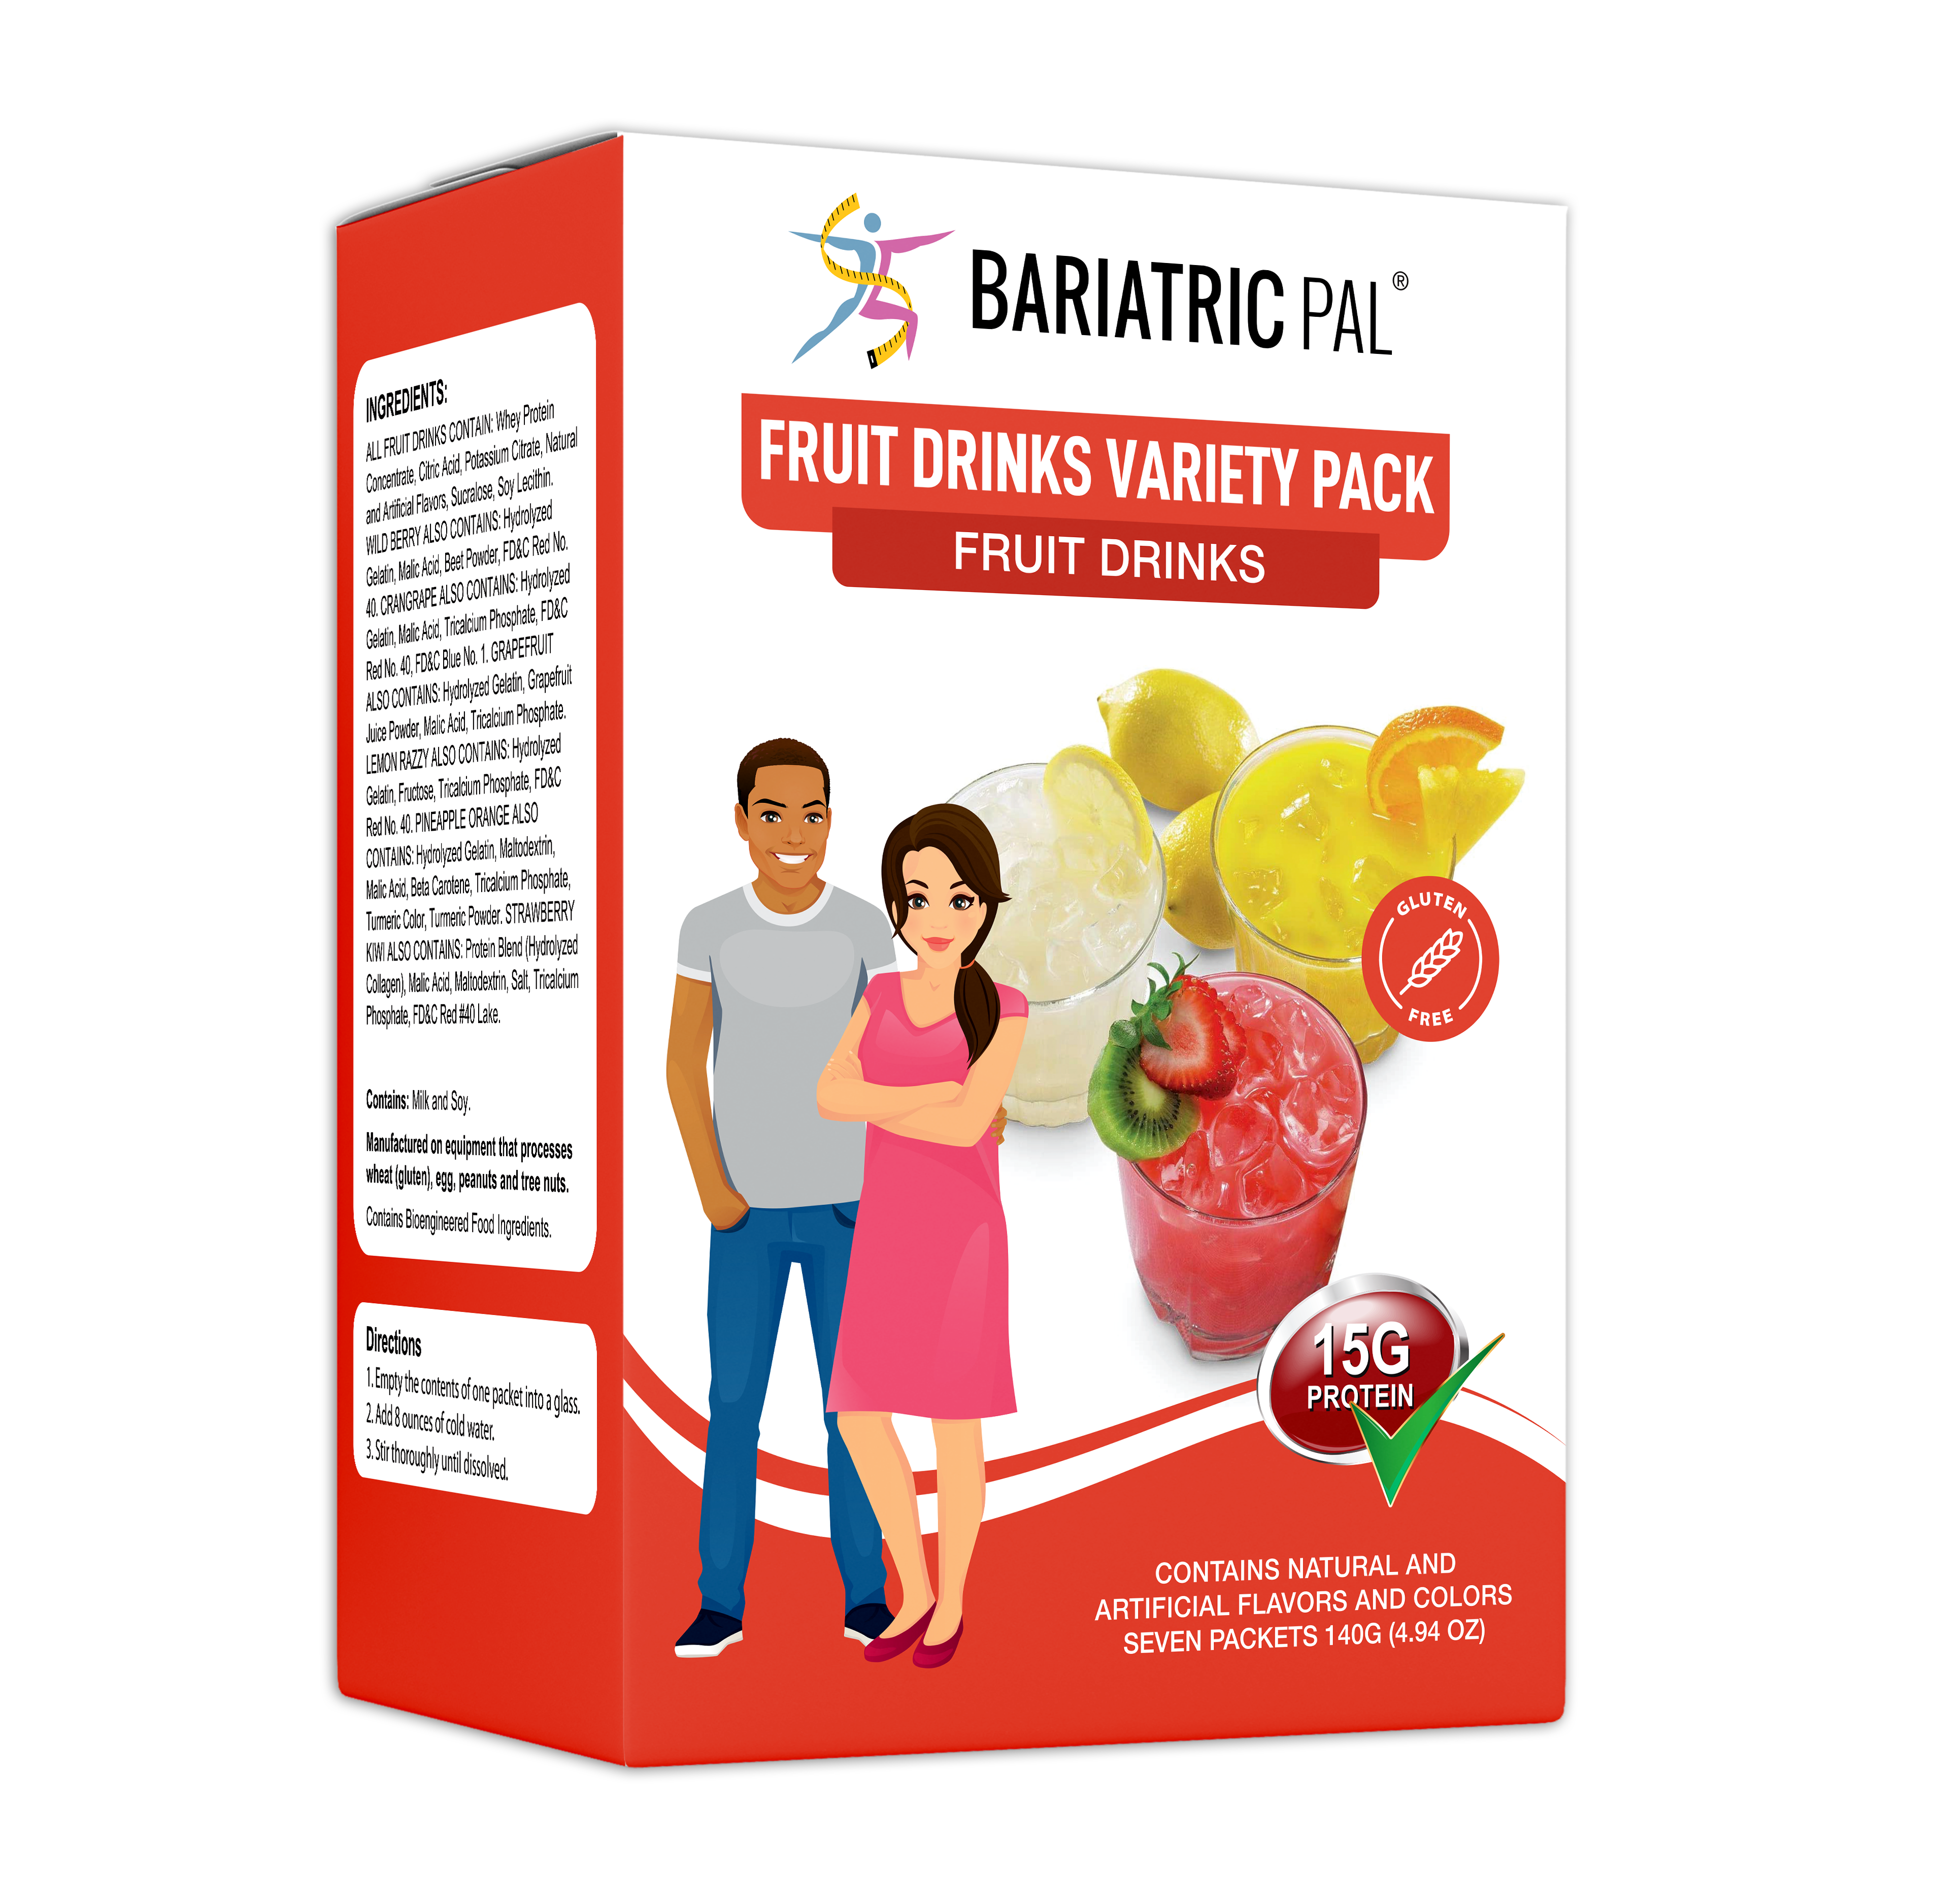 Bariatricpal Fruit Protein Drinks - Variety Pack - High-quality Fruit Drinks by BariatricPal at 